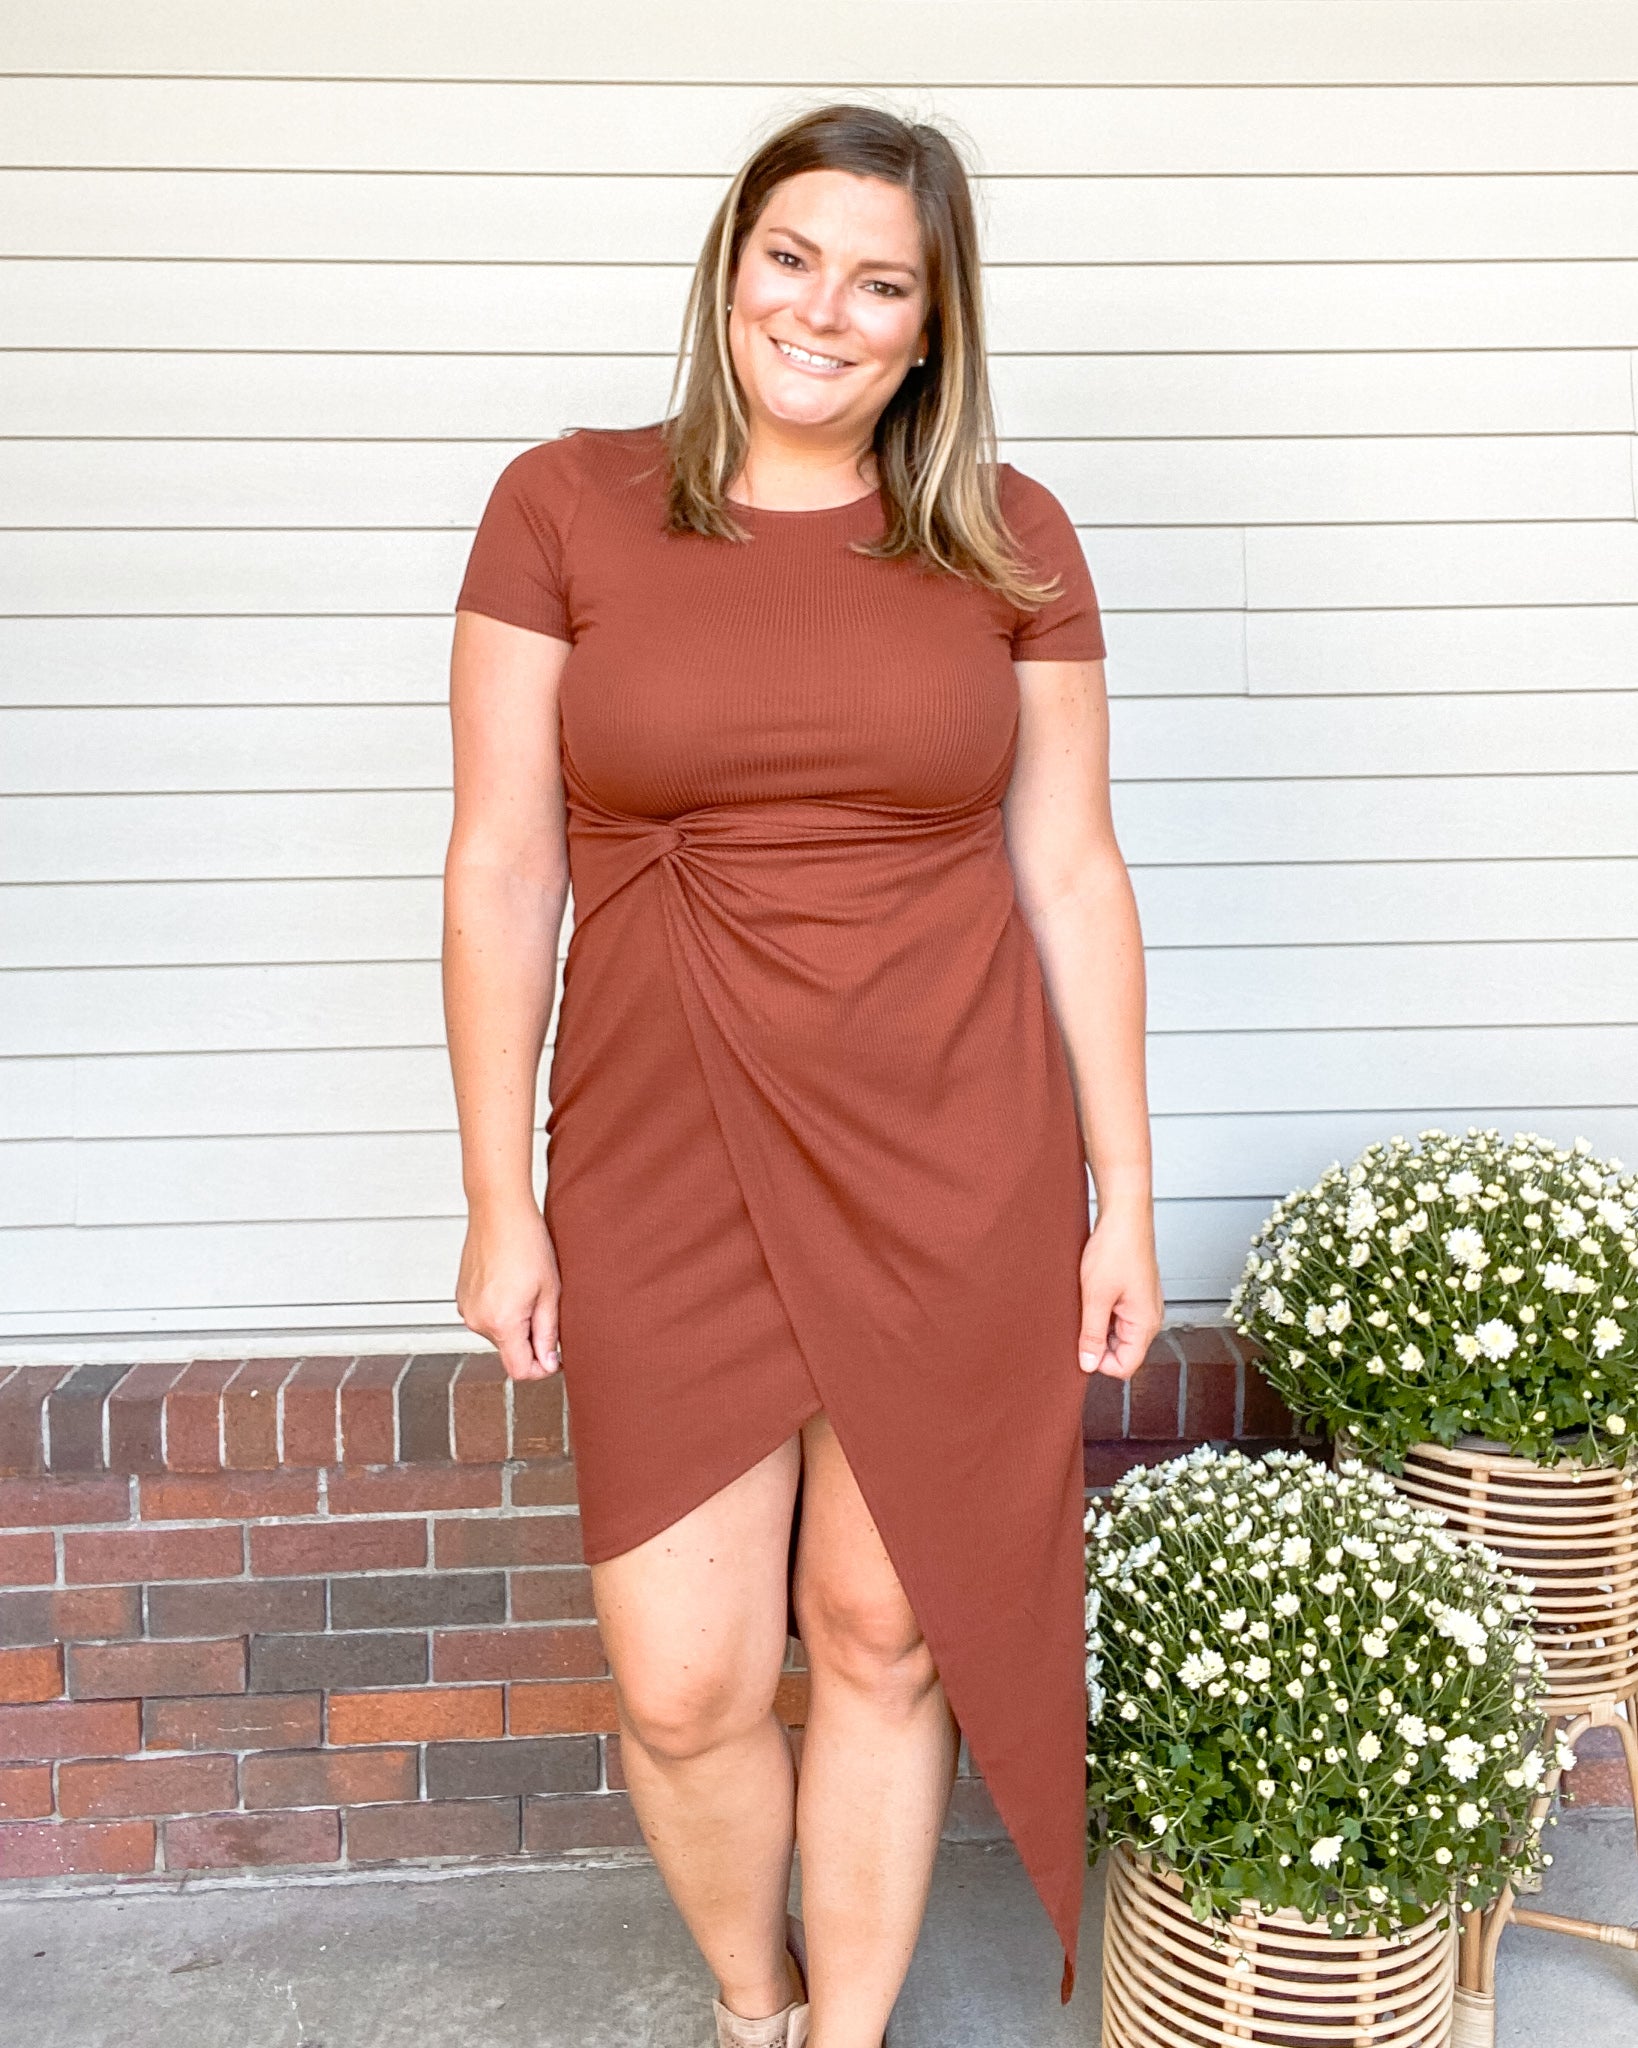 Page 2 for Plus Size Clothing For Sale For Women